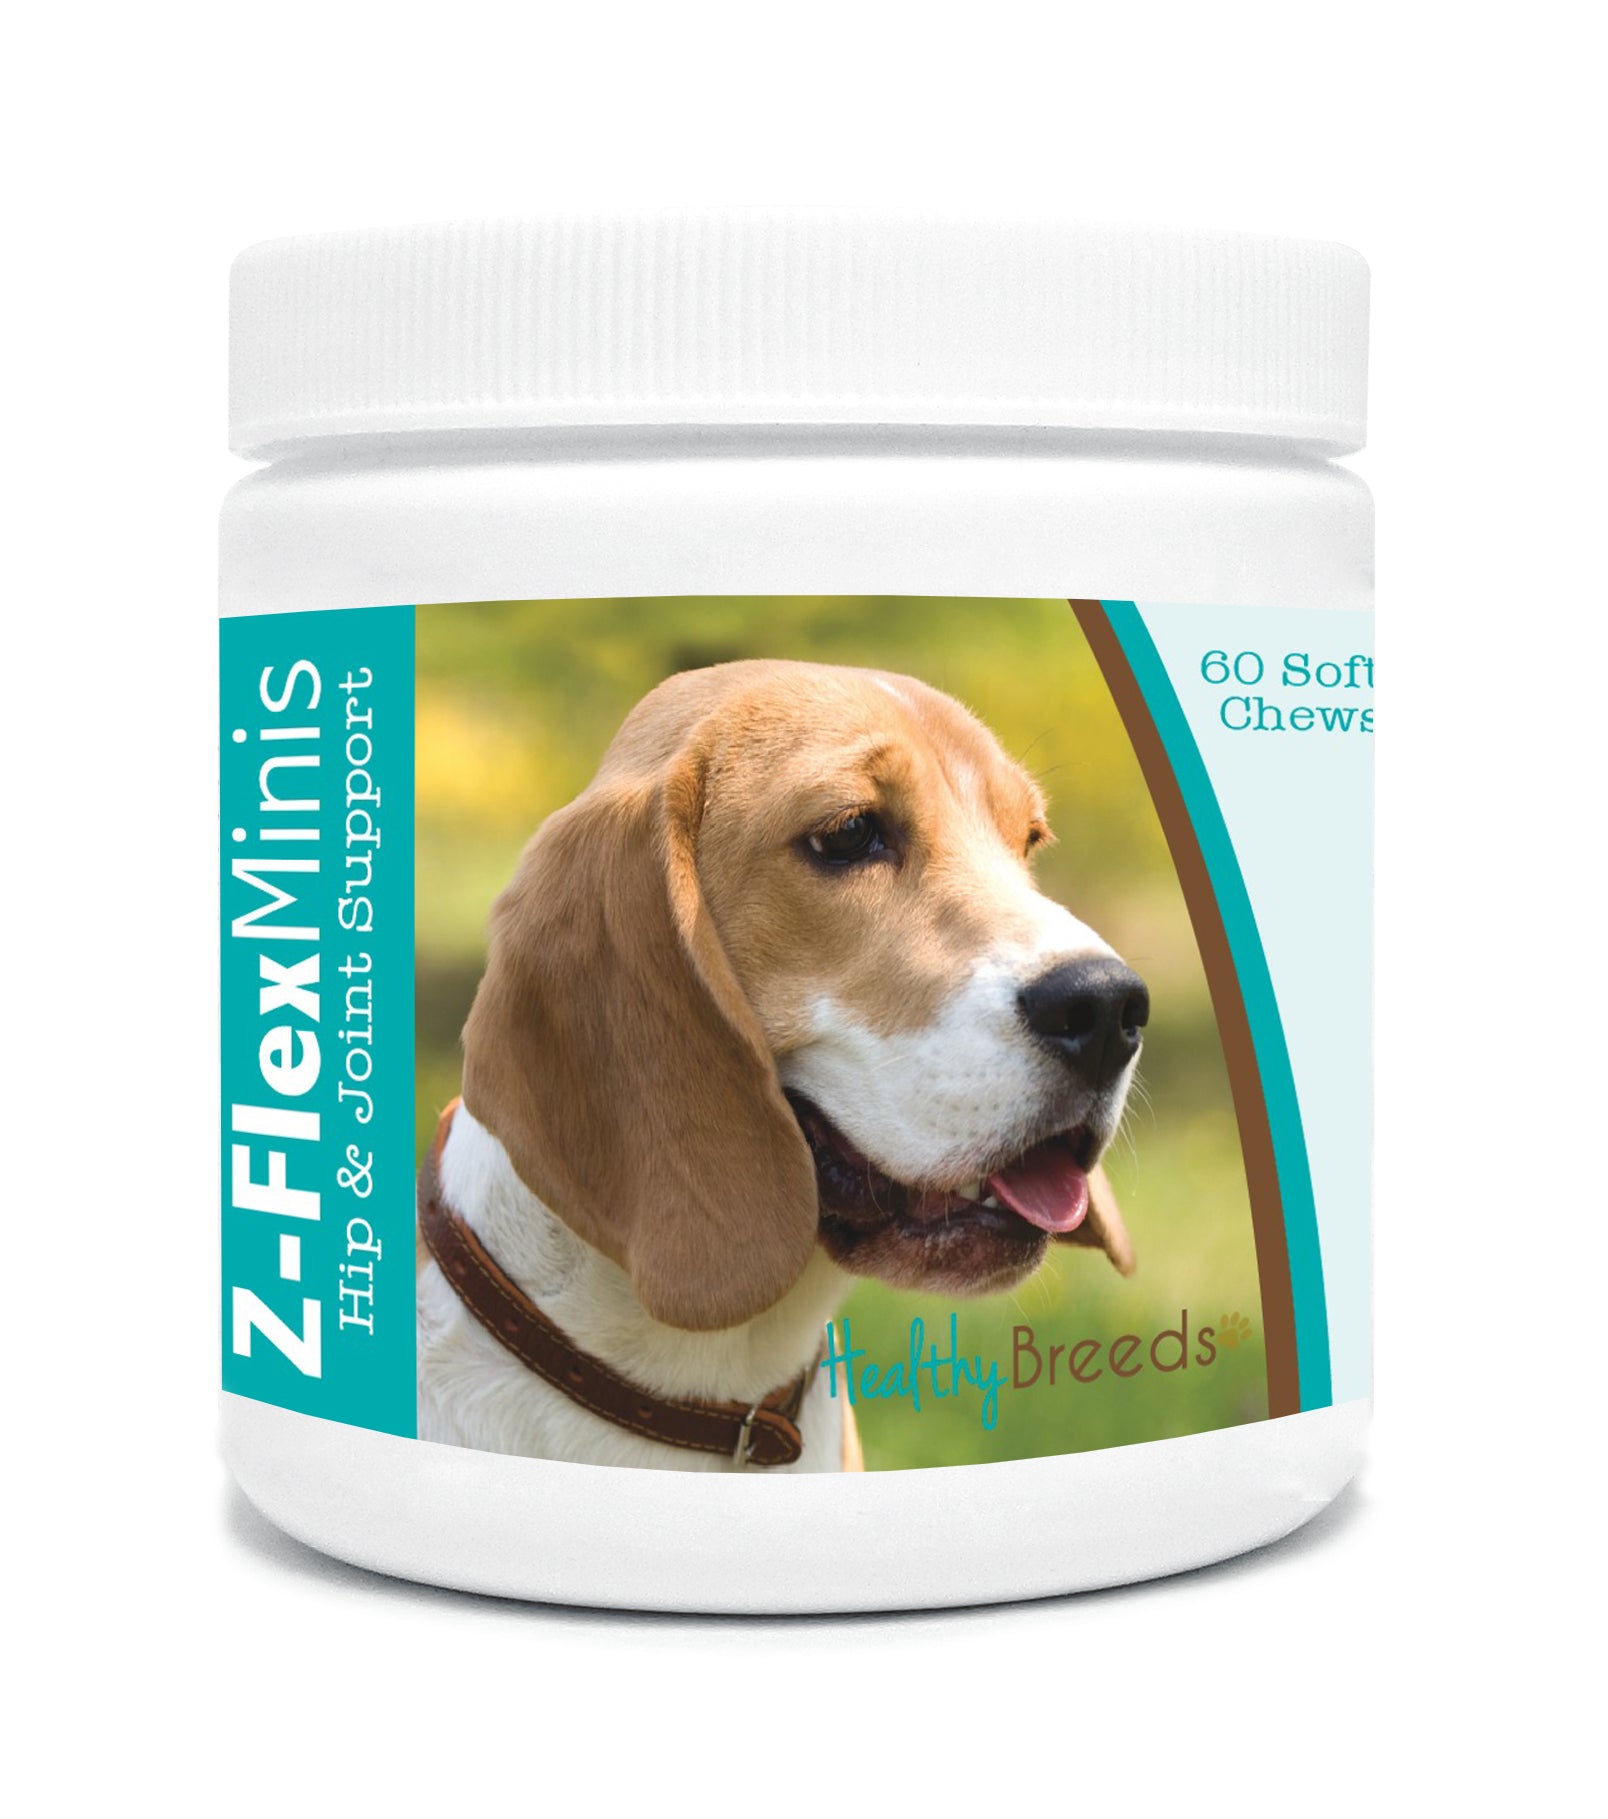 Beagle Z-Flex Minis Hip and Joint Support Soft Chews 60 Count